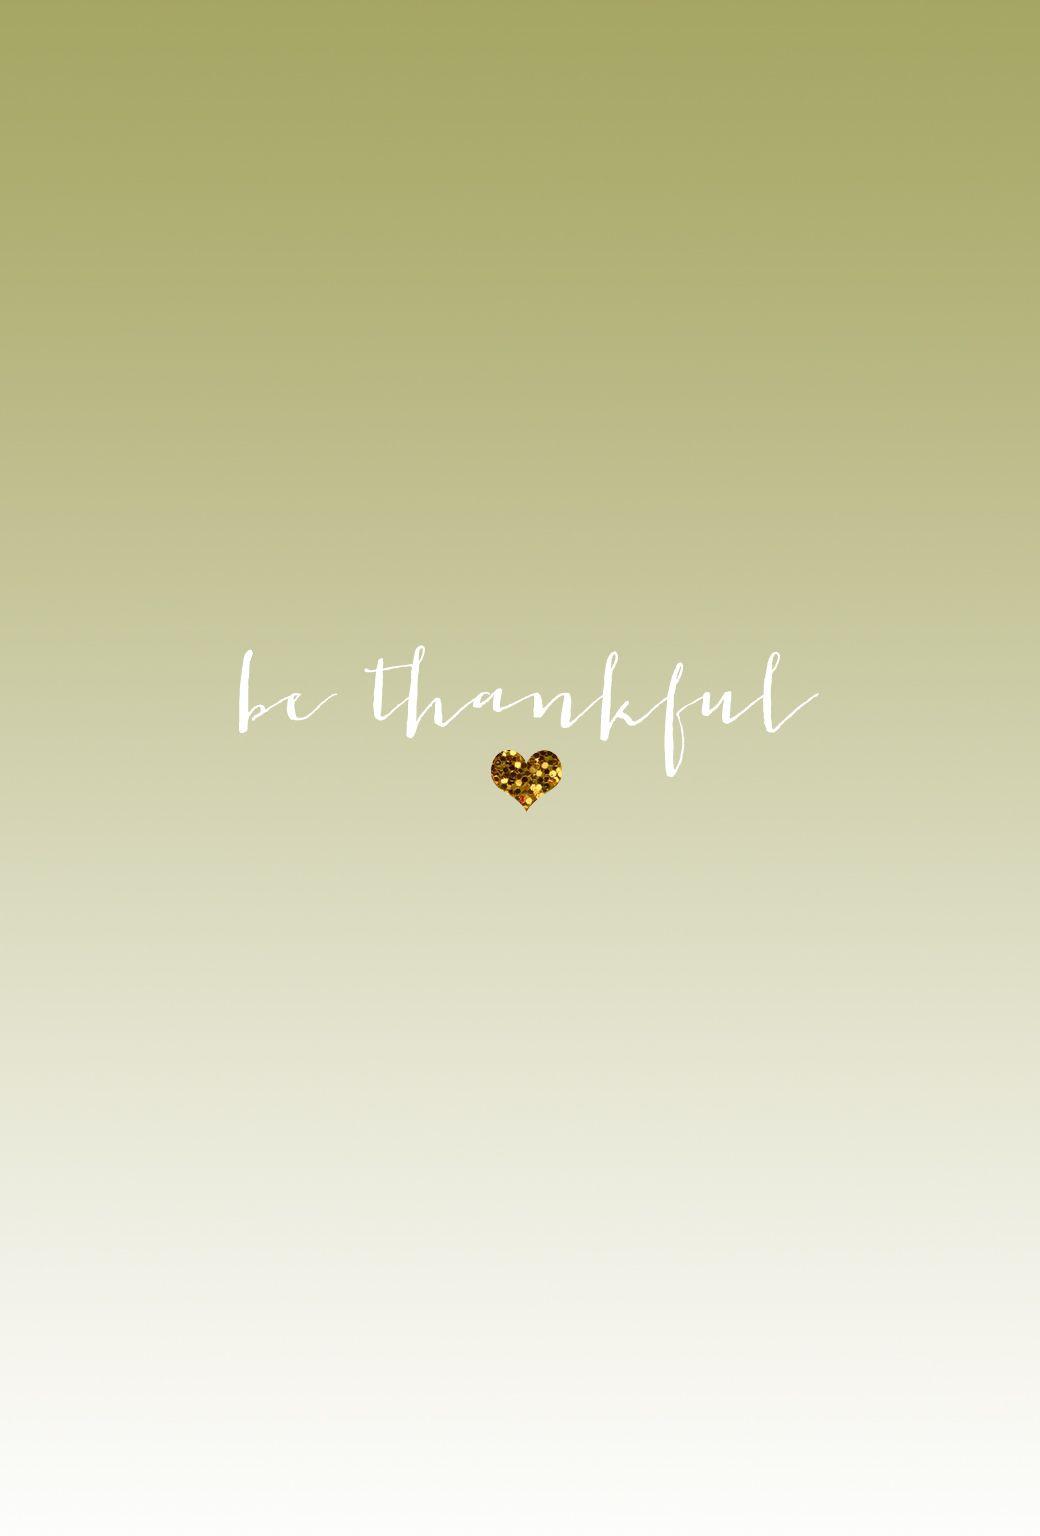 Be Thankful iPhone Wallpaper Lovely Indeed